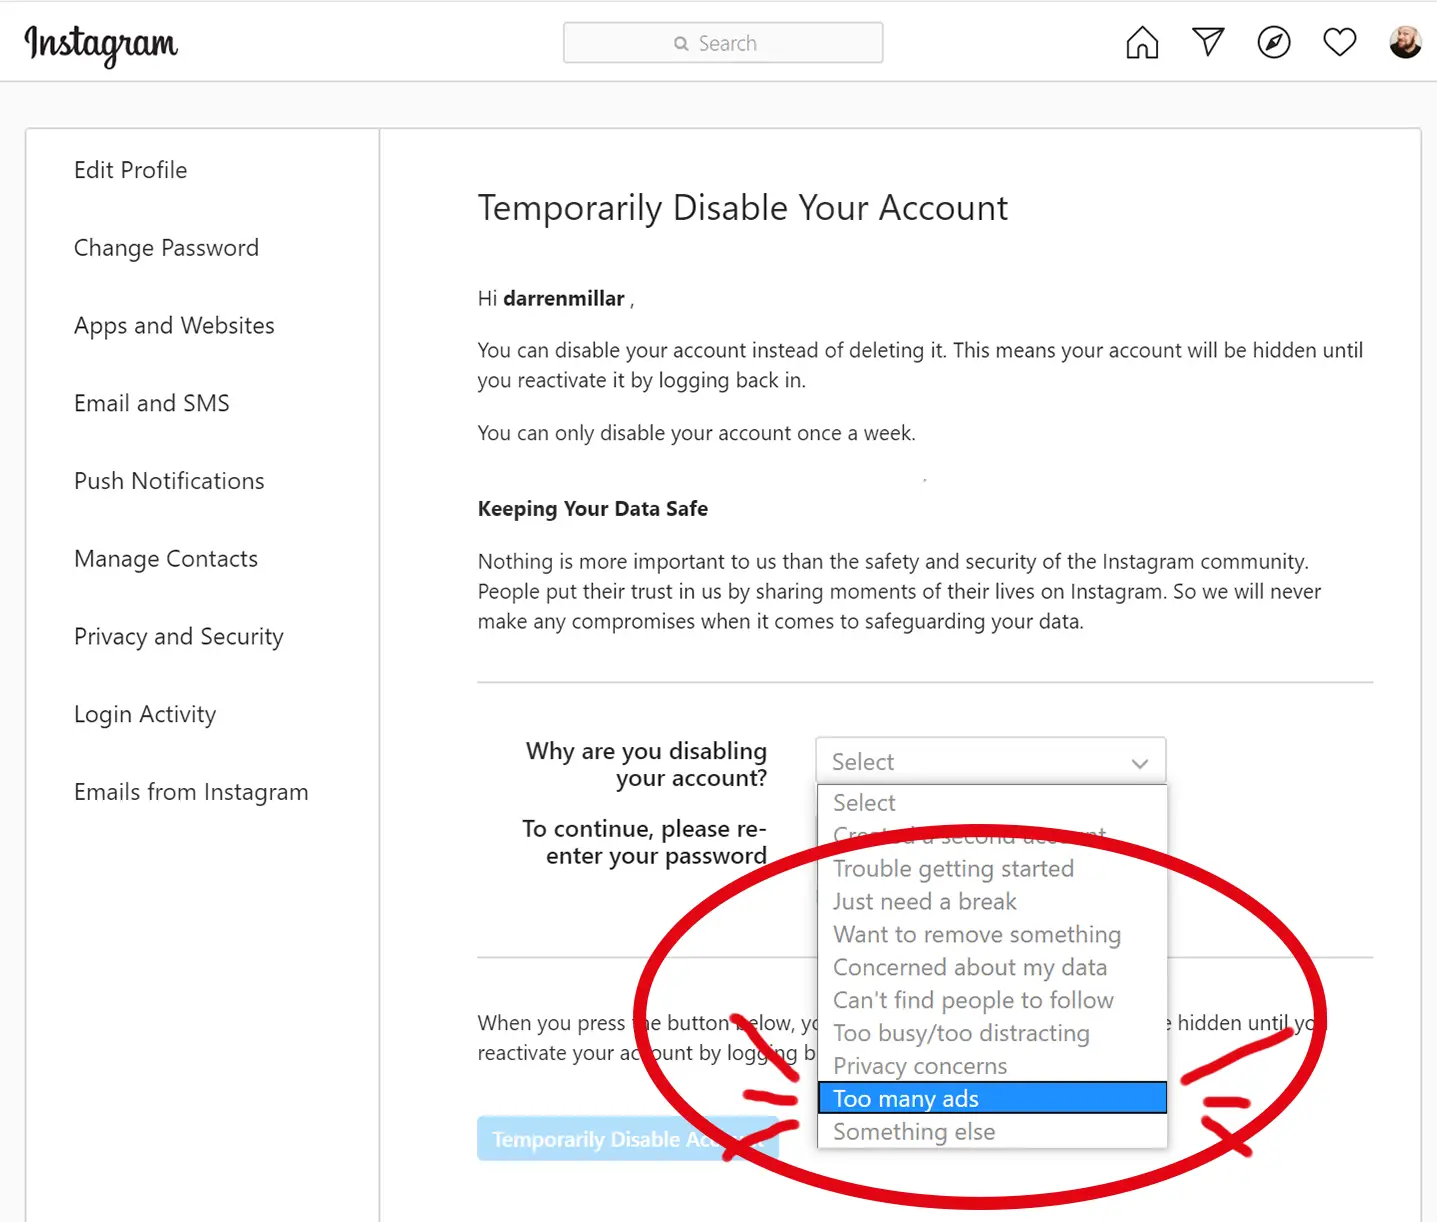 How to temporarily disable or suspend your Instagram account